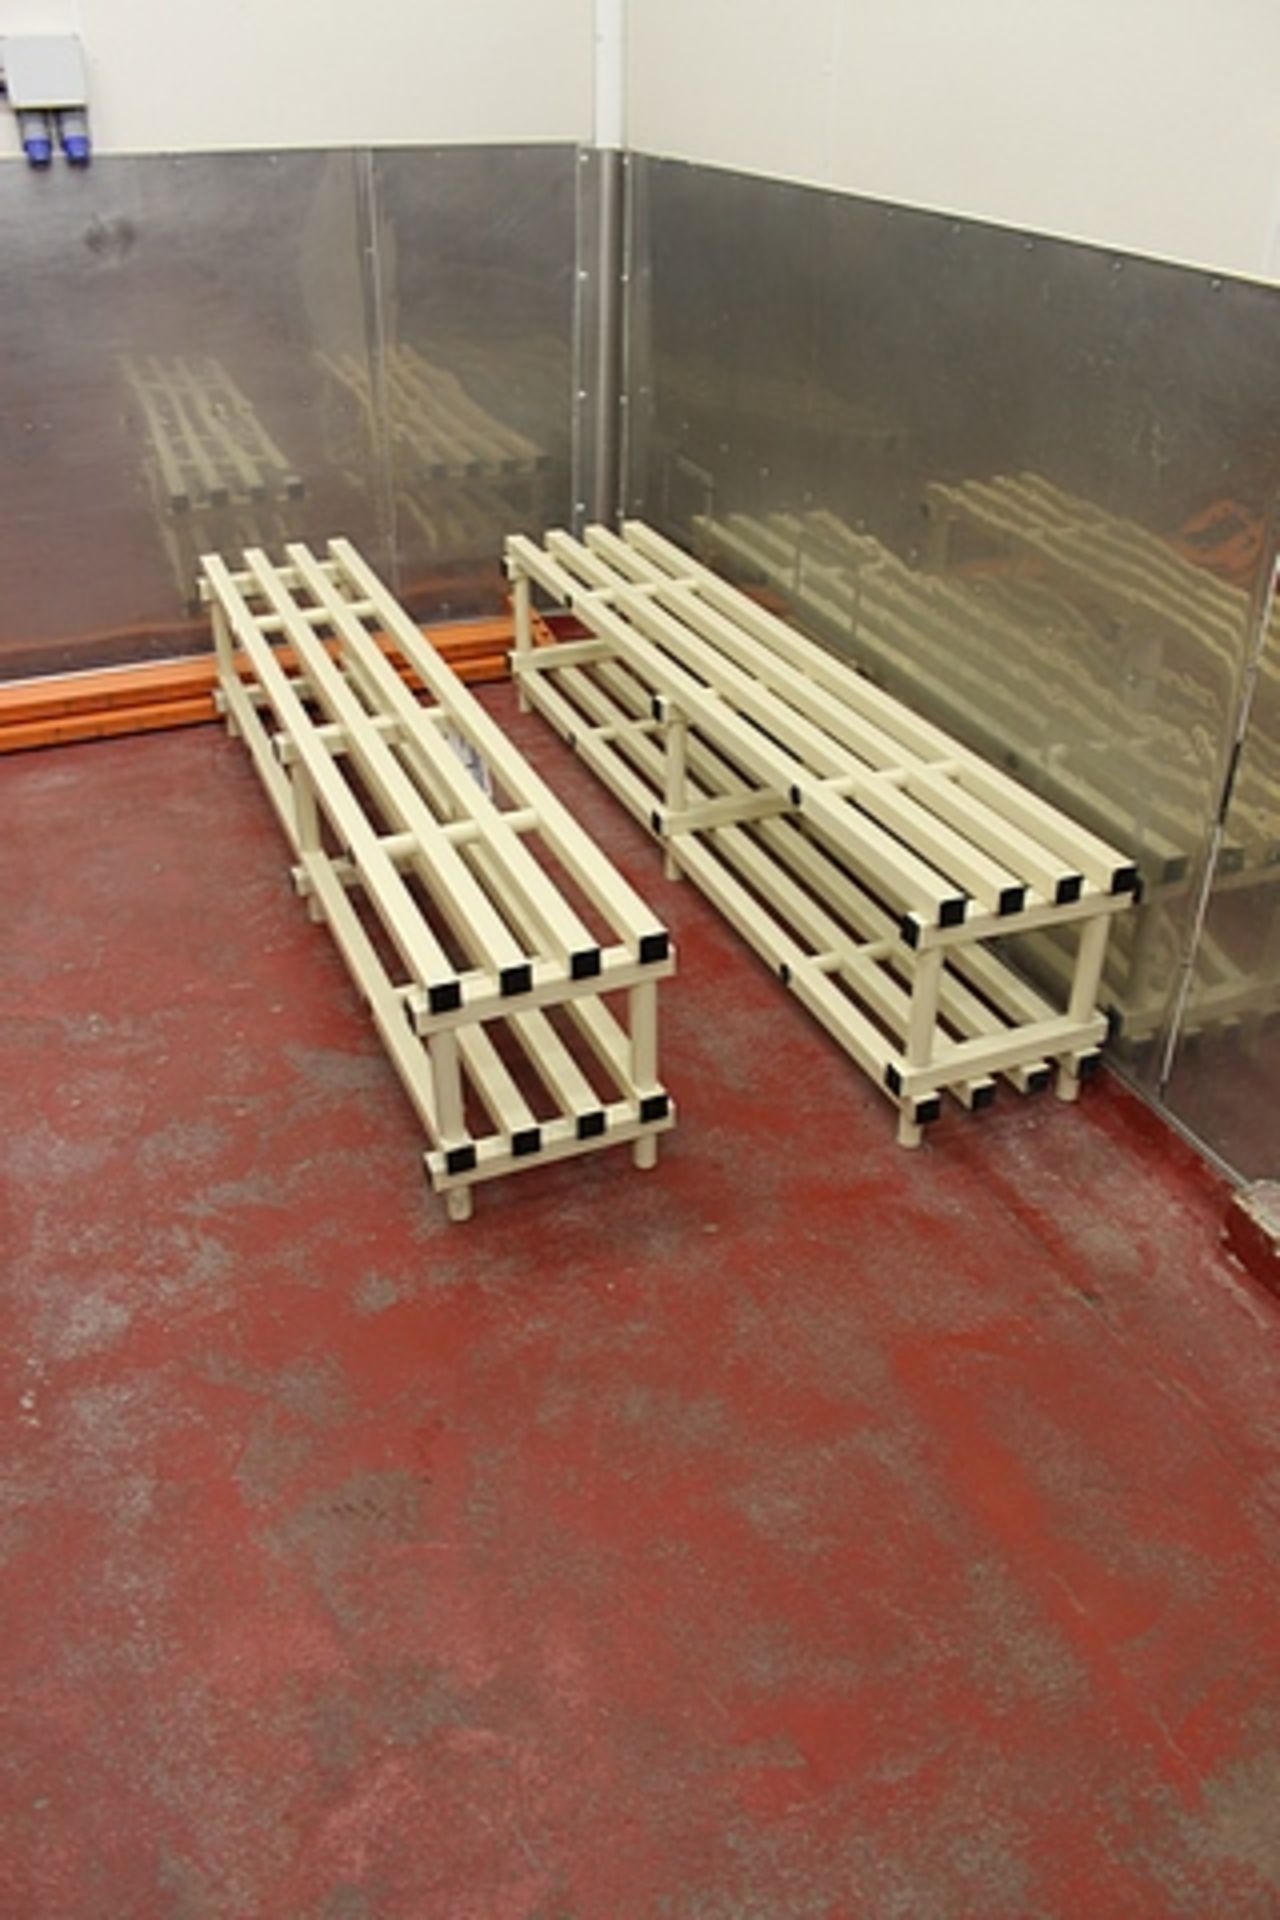 2 x plastic bench seat plastic changing room bench with undershelf for shoes rust, rot, corrosion